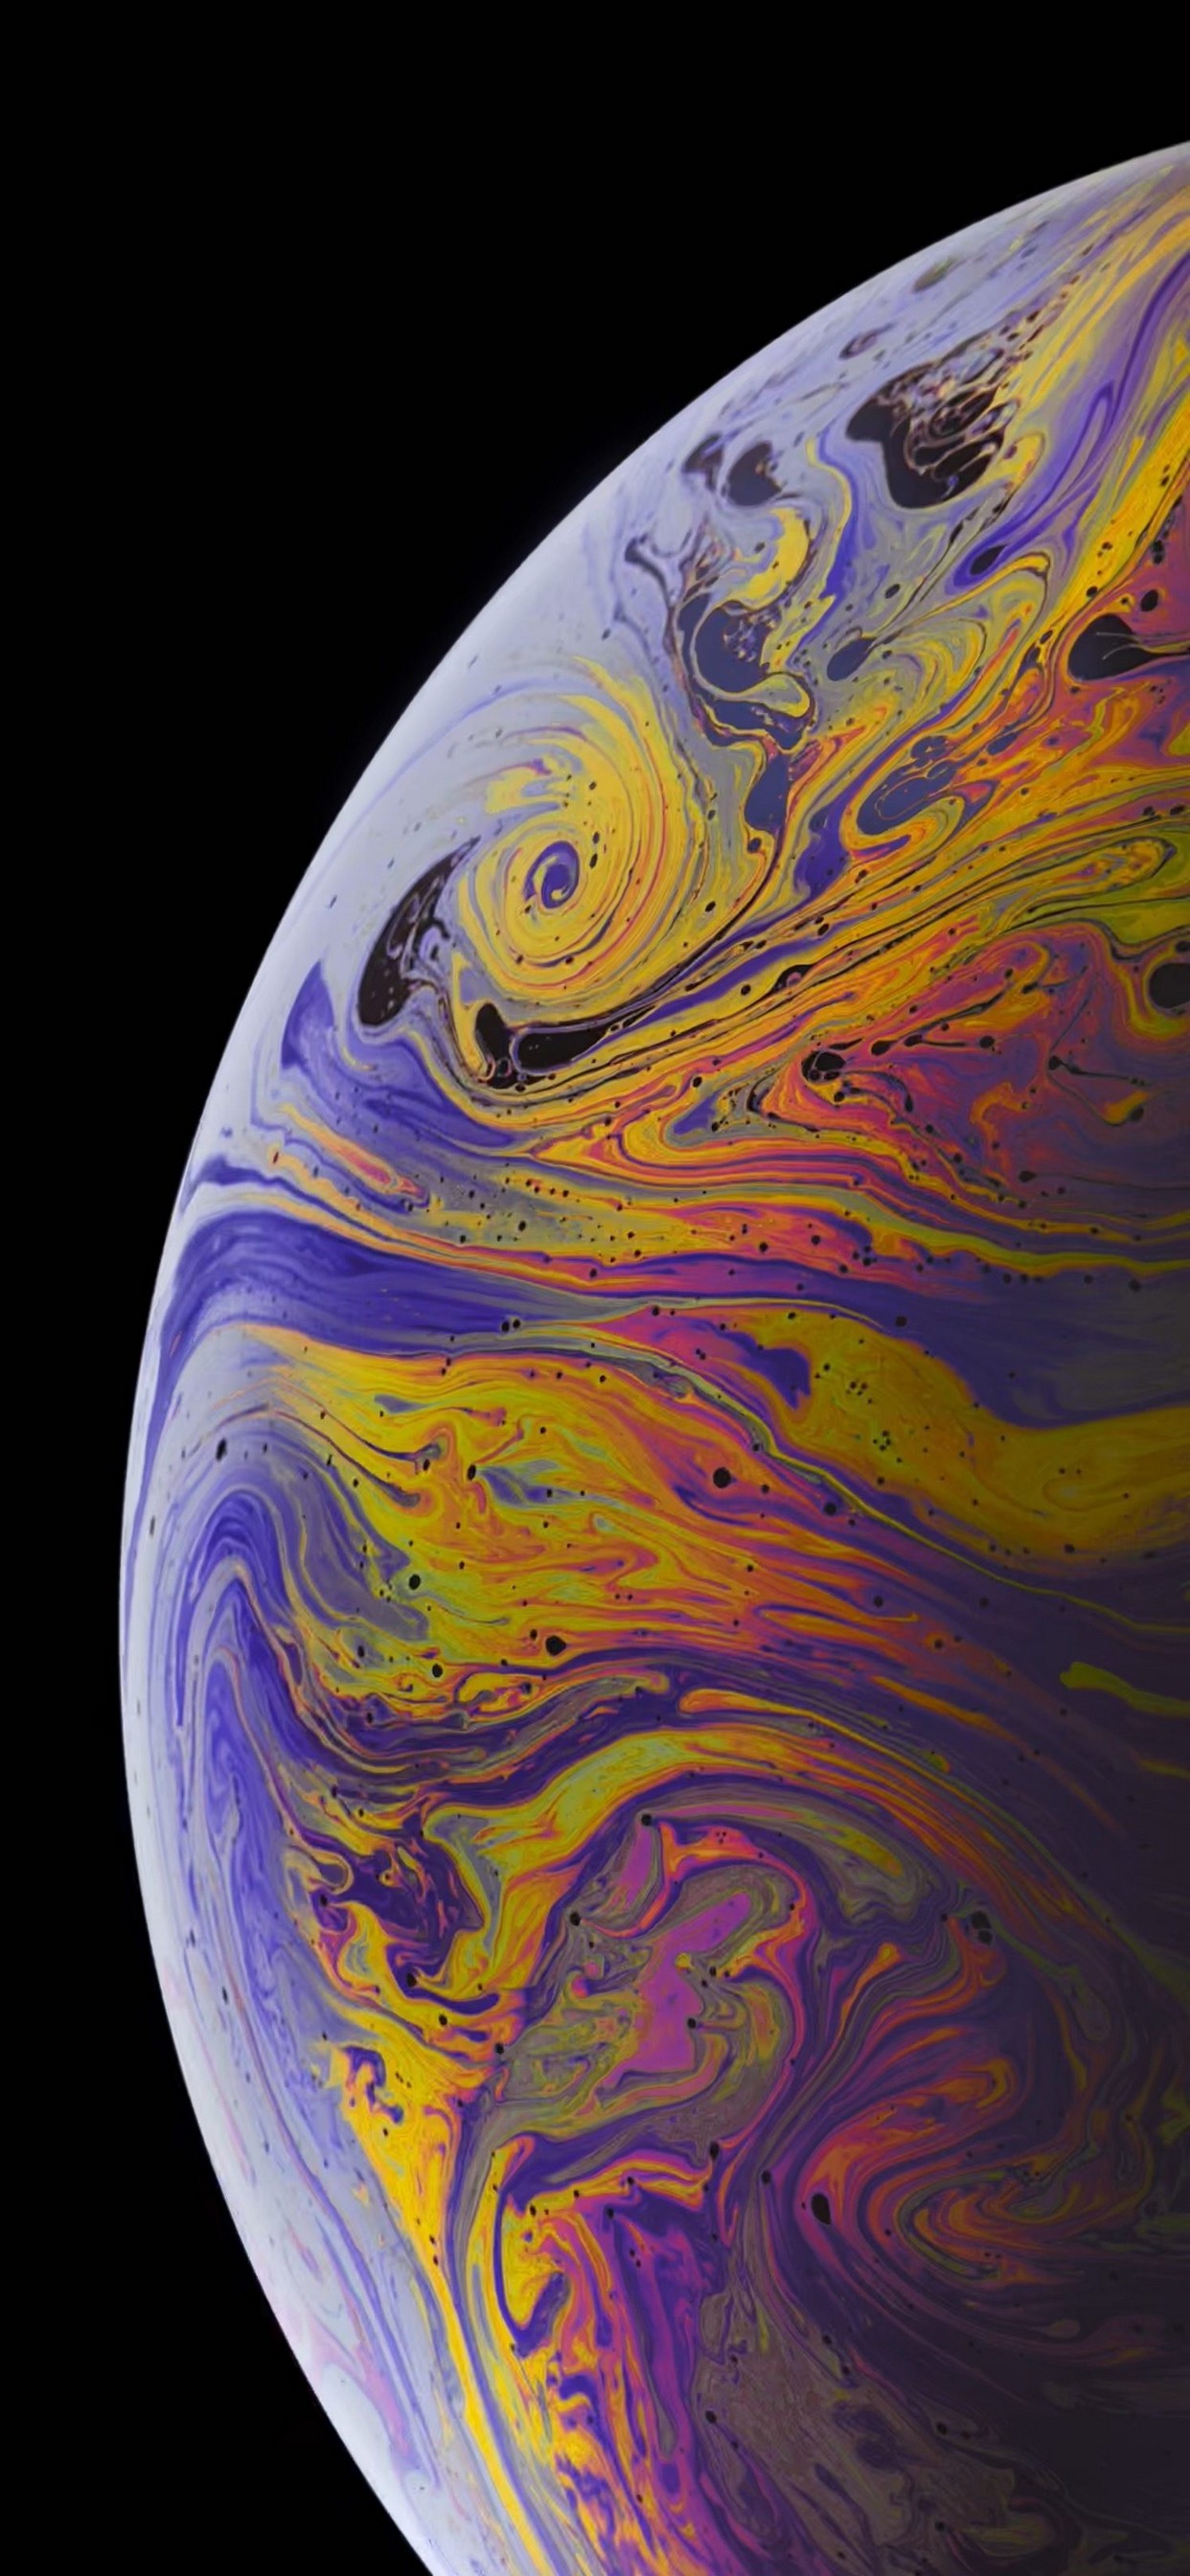 iPhone XS Max Wallpaper Lock Screen with high-resolution 1242x2688 pixel. You can set as wallpaper for Apple iPhone X, XS Max, XR, 8, 7, 6, SE, iPad. Enjoy and share your favorite HD wallpapers and background images